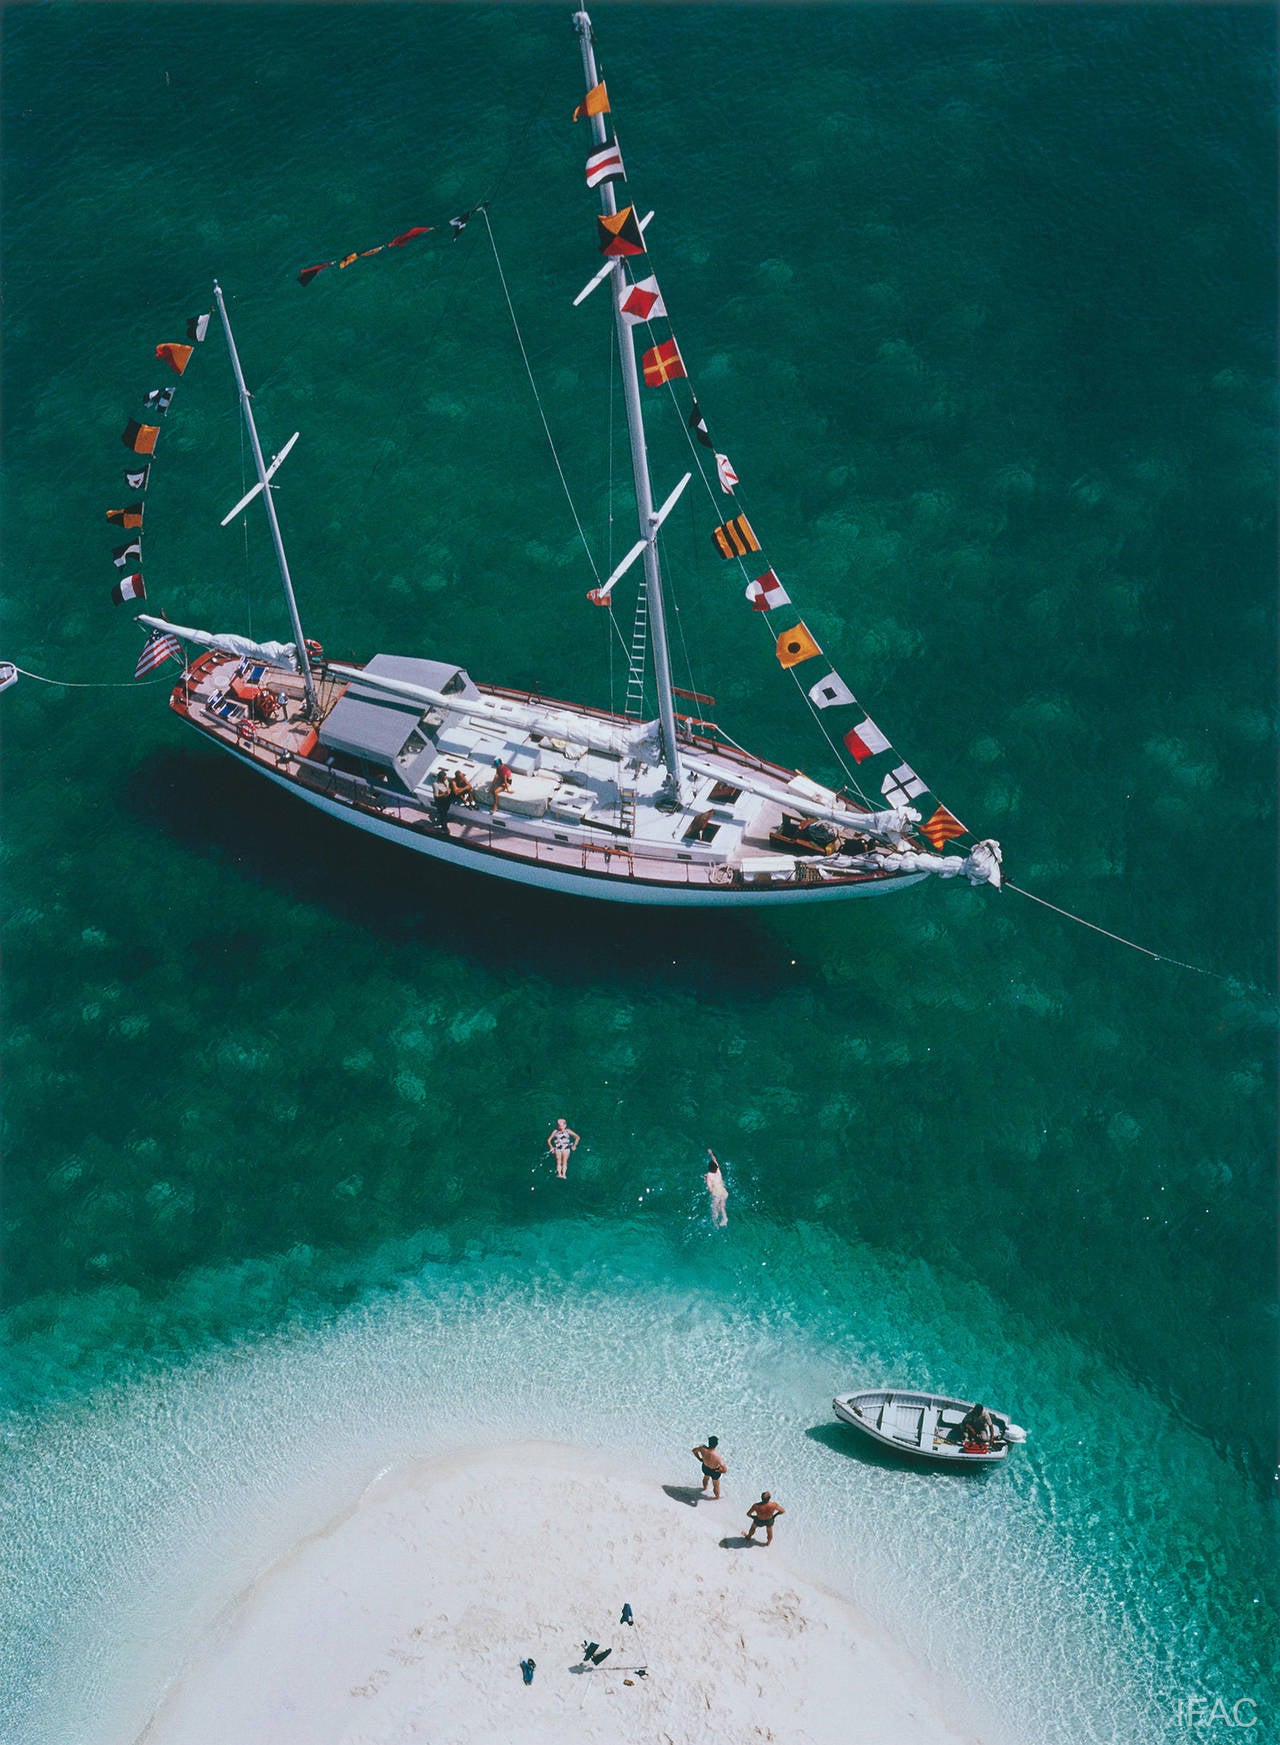 Slim Aarons Color Photograph - Exuma Holiday (Aarons Estate Edition)